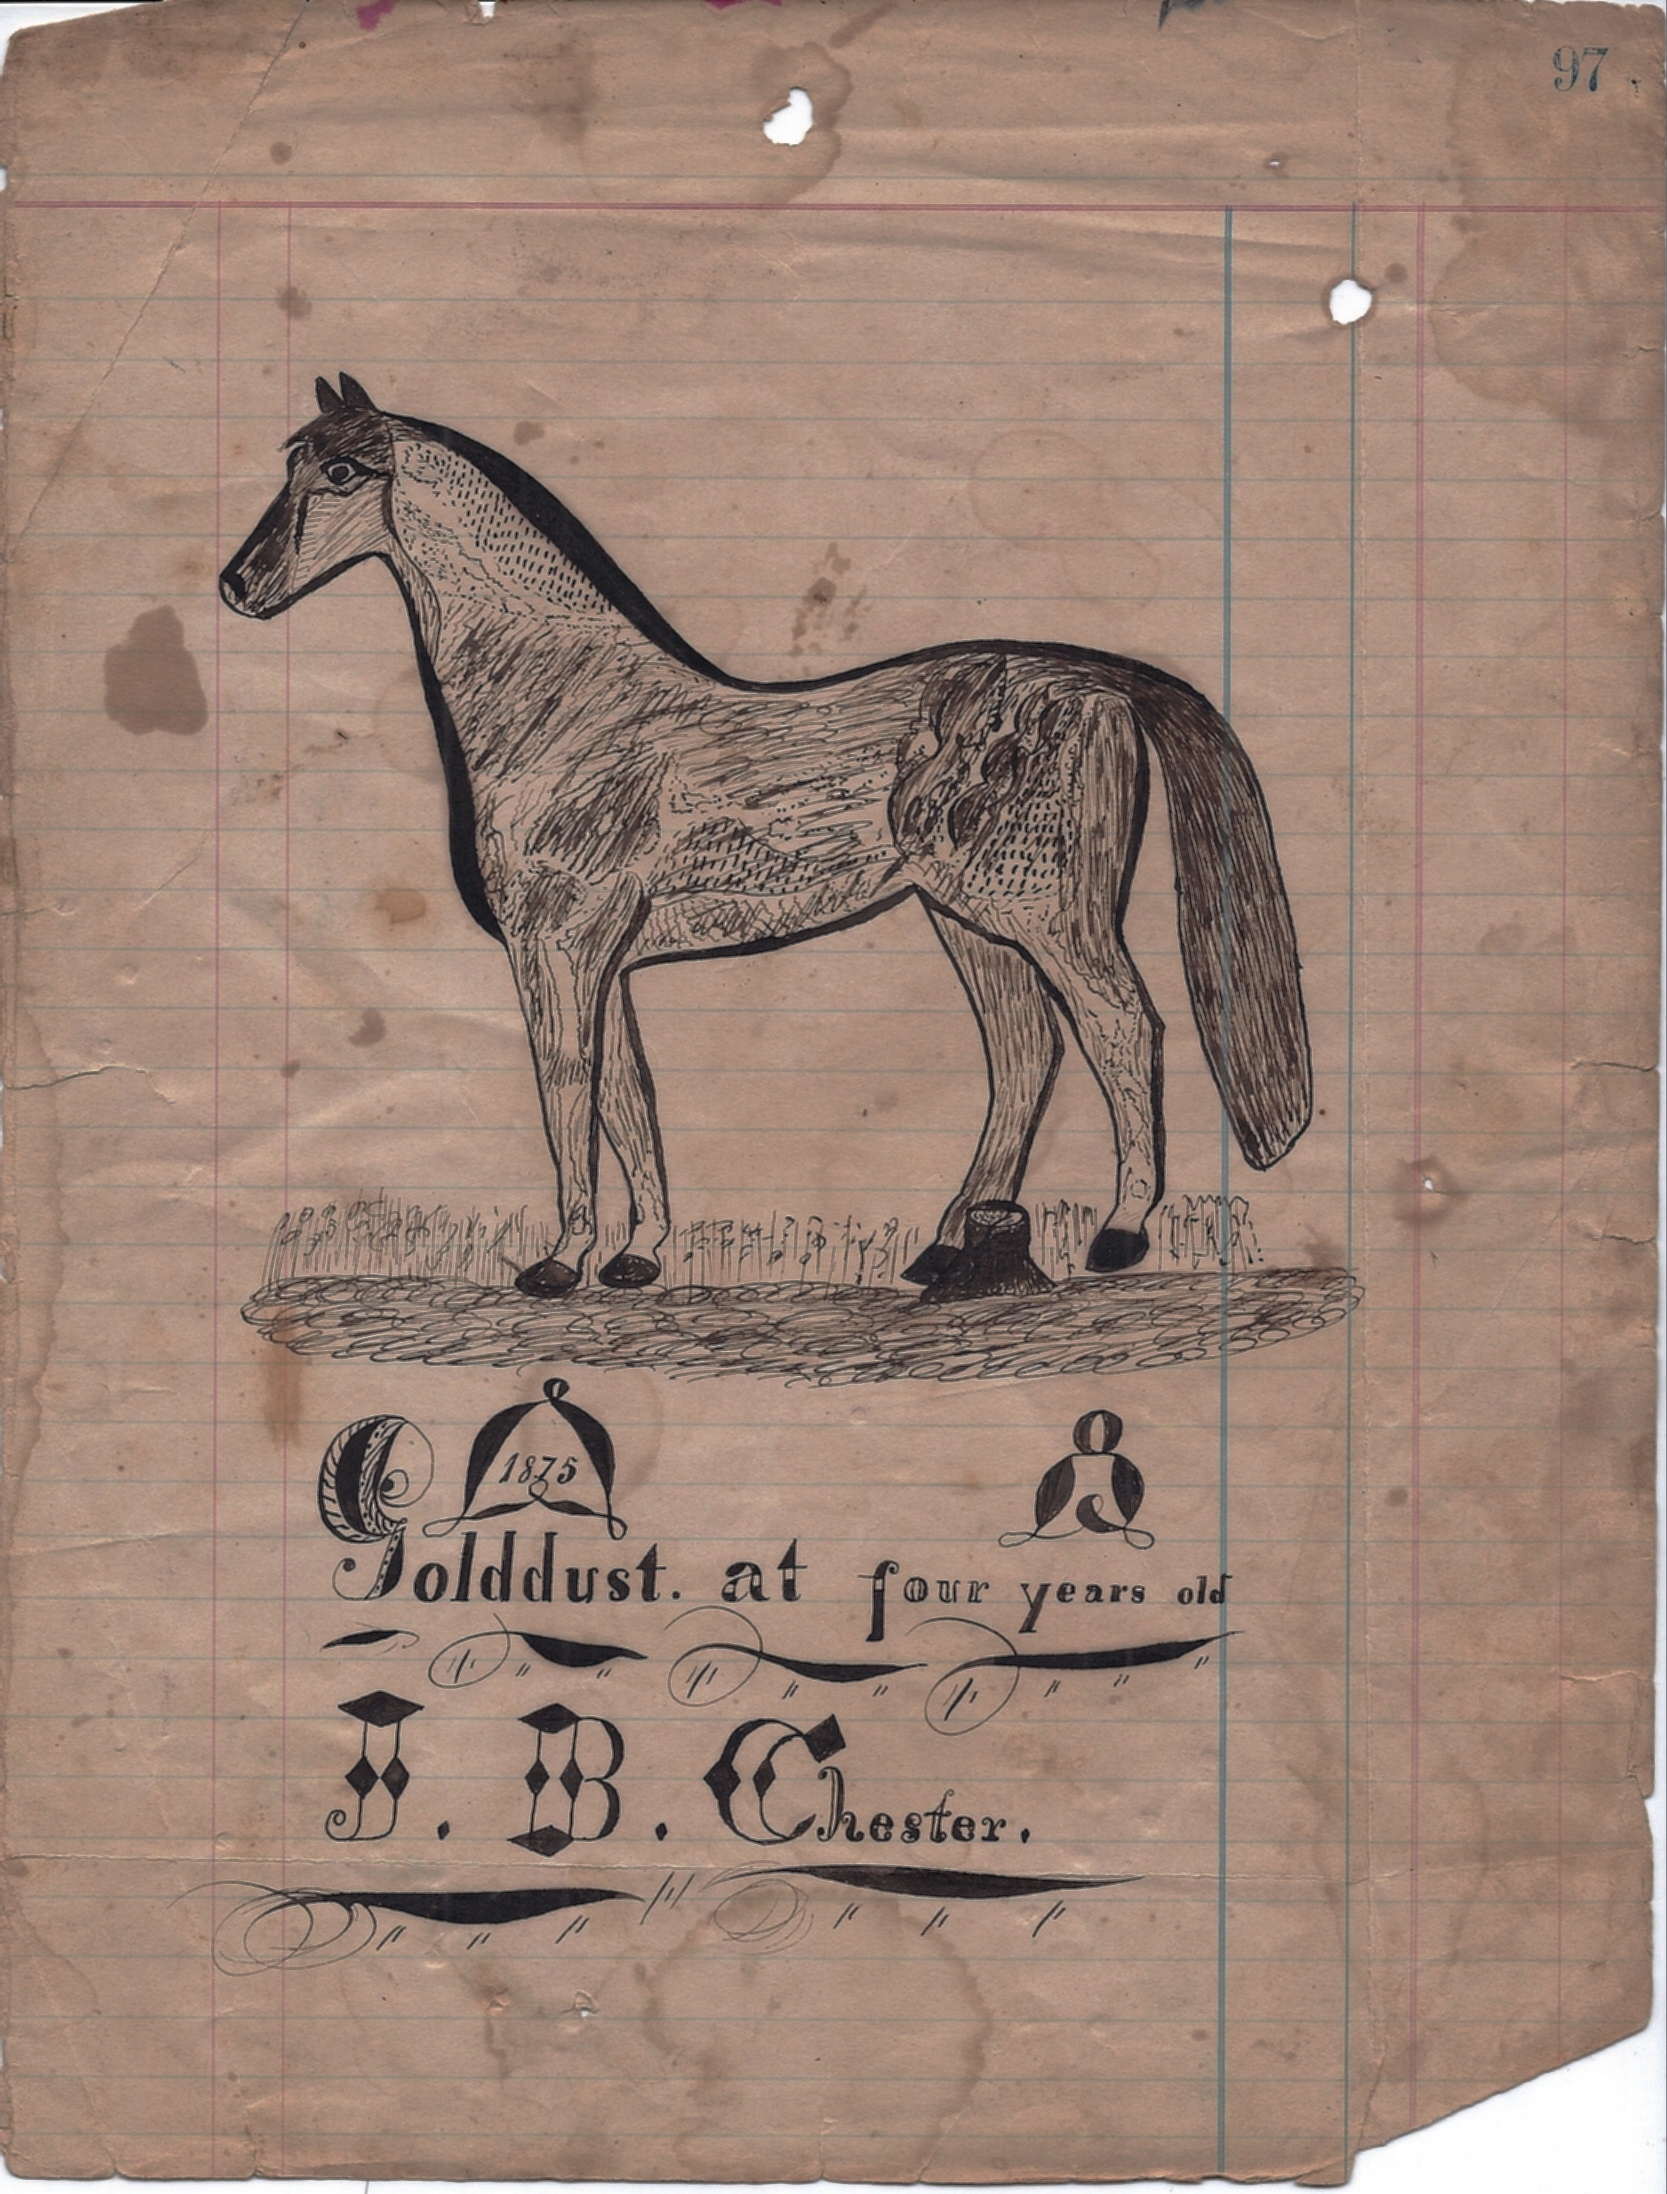   Josiah B. Chester, artist,  Golddust at four-years old . Harrison Township, 1875]. Chester was a tenant farmer and basketmaker. His journal is illustrated with creative and whimsical drawings that establish him as one of Harrison Township’s importa